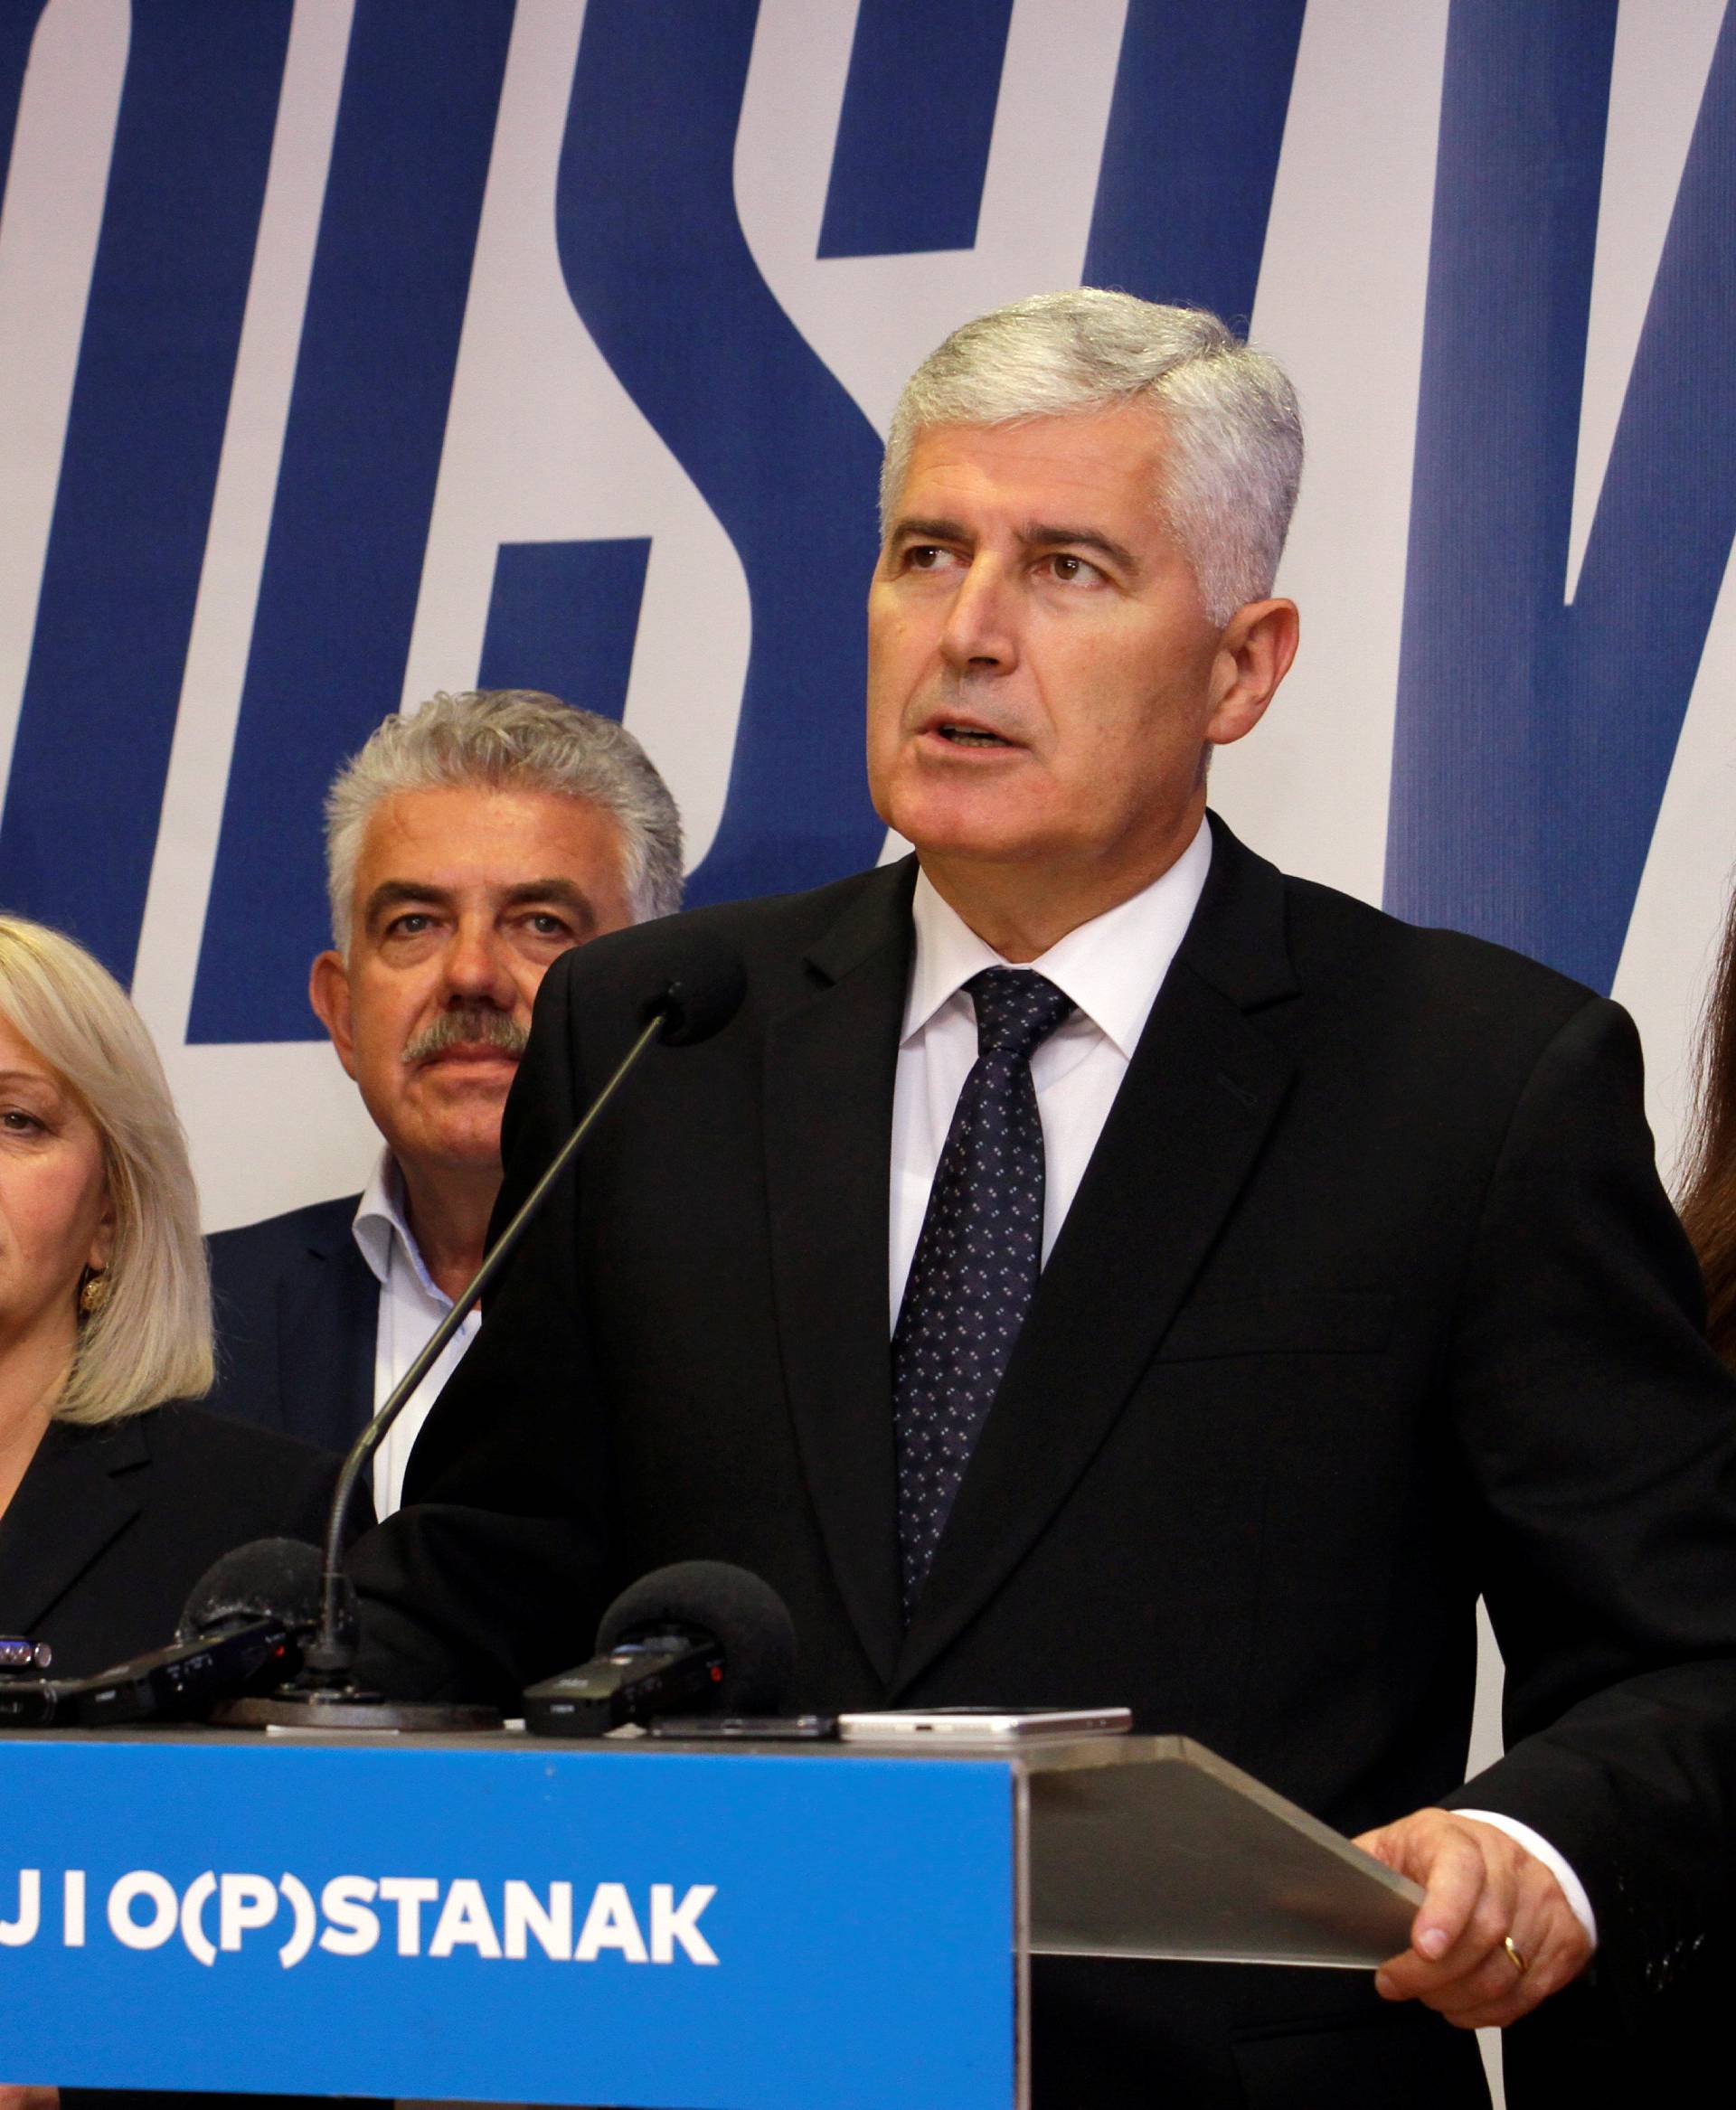 Dragan Covic, President of the Croatian Democratic Union (HDZ), attends a news conference in Mostar